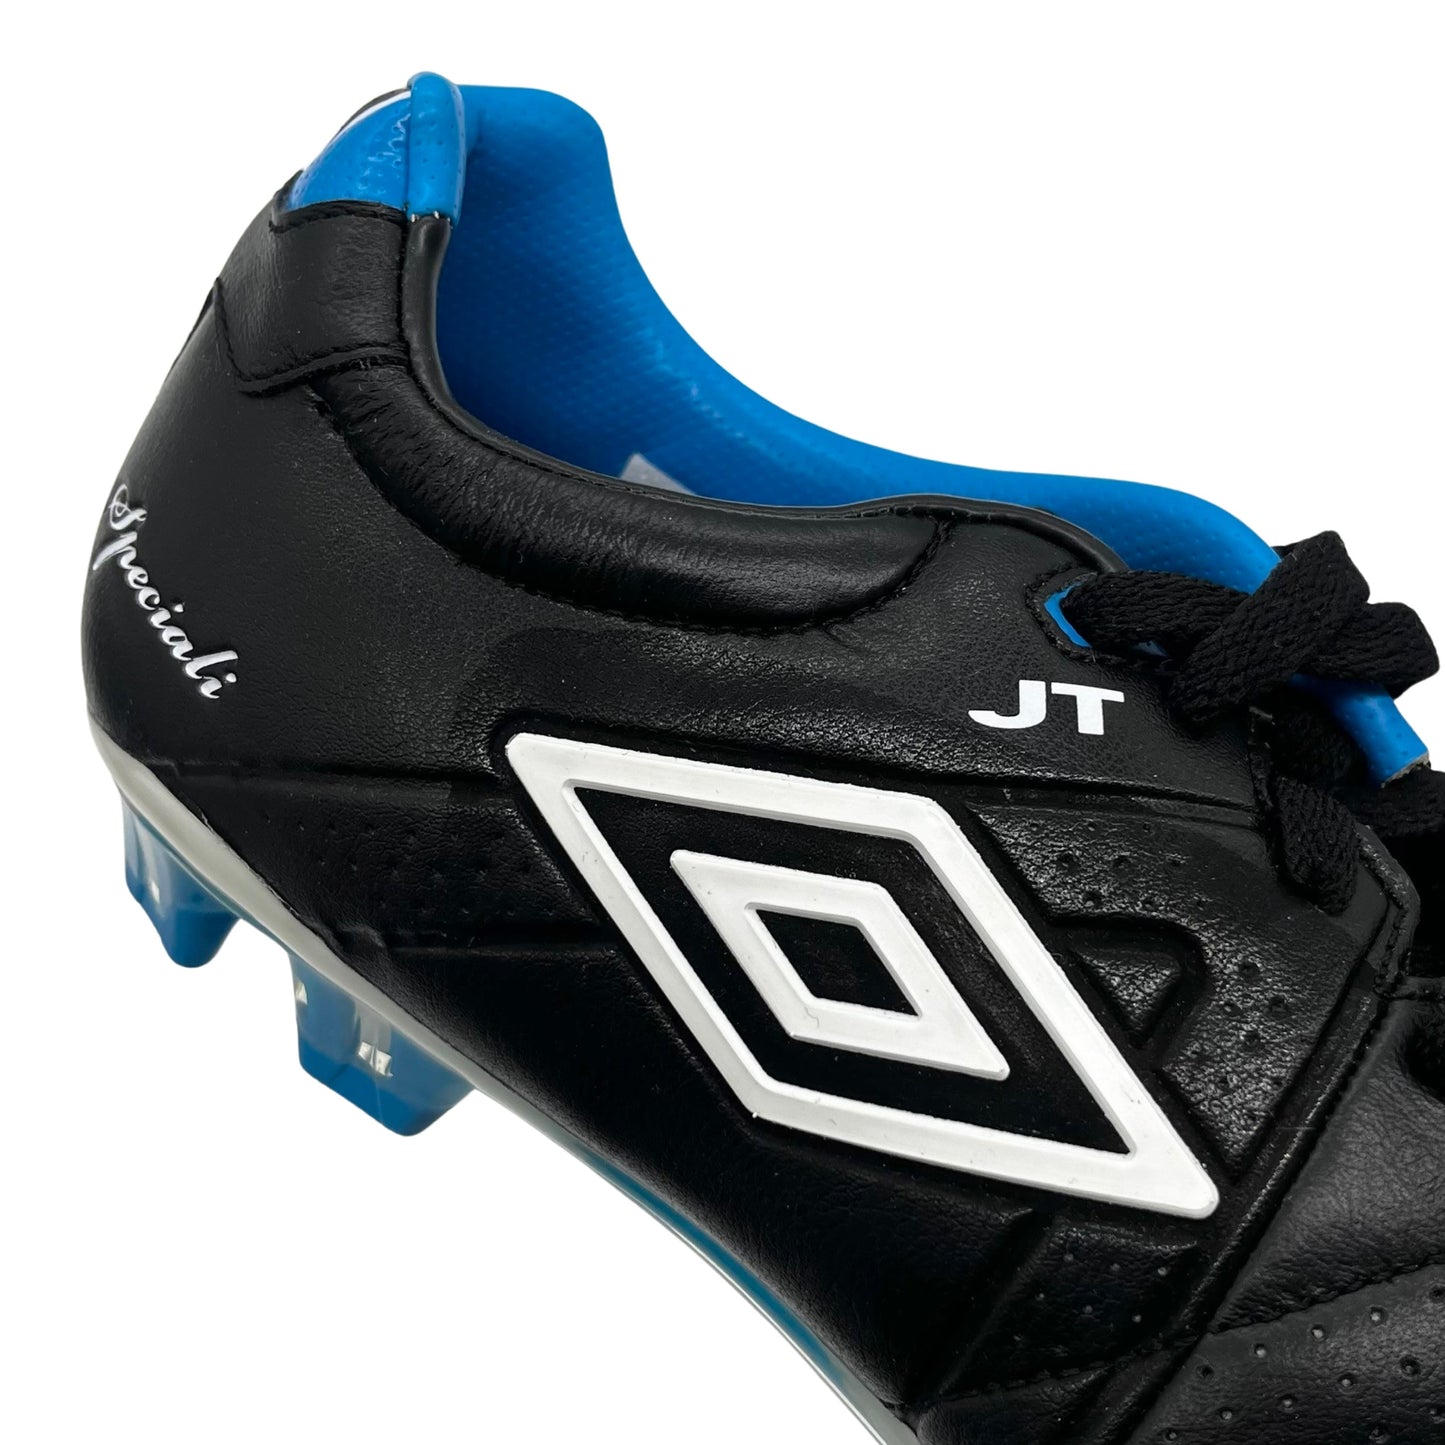 John Terry Match Issued Umbro Speciali 3 Pro